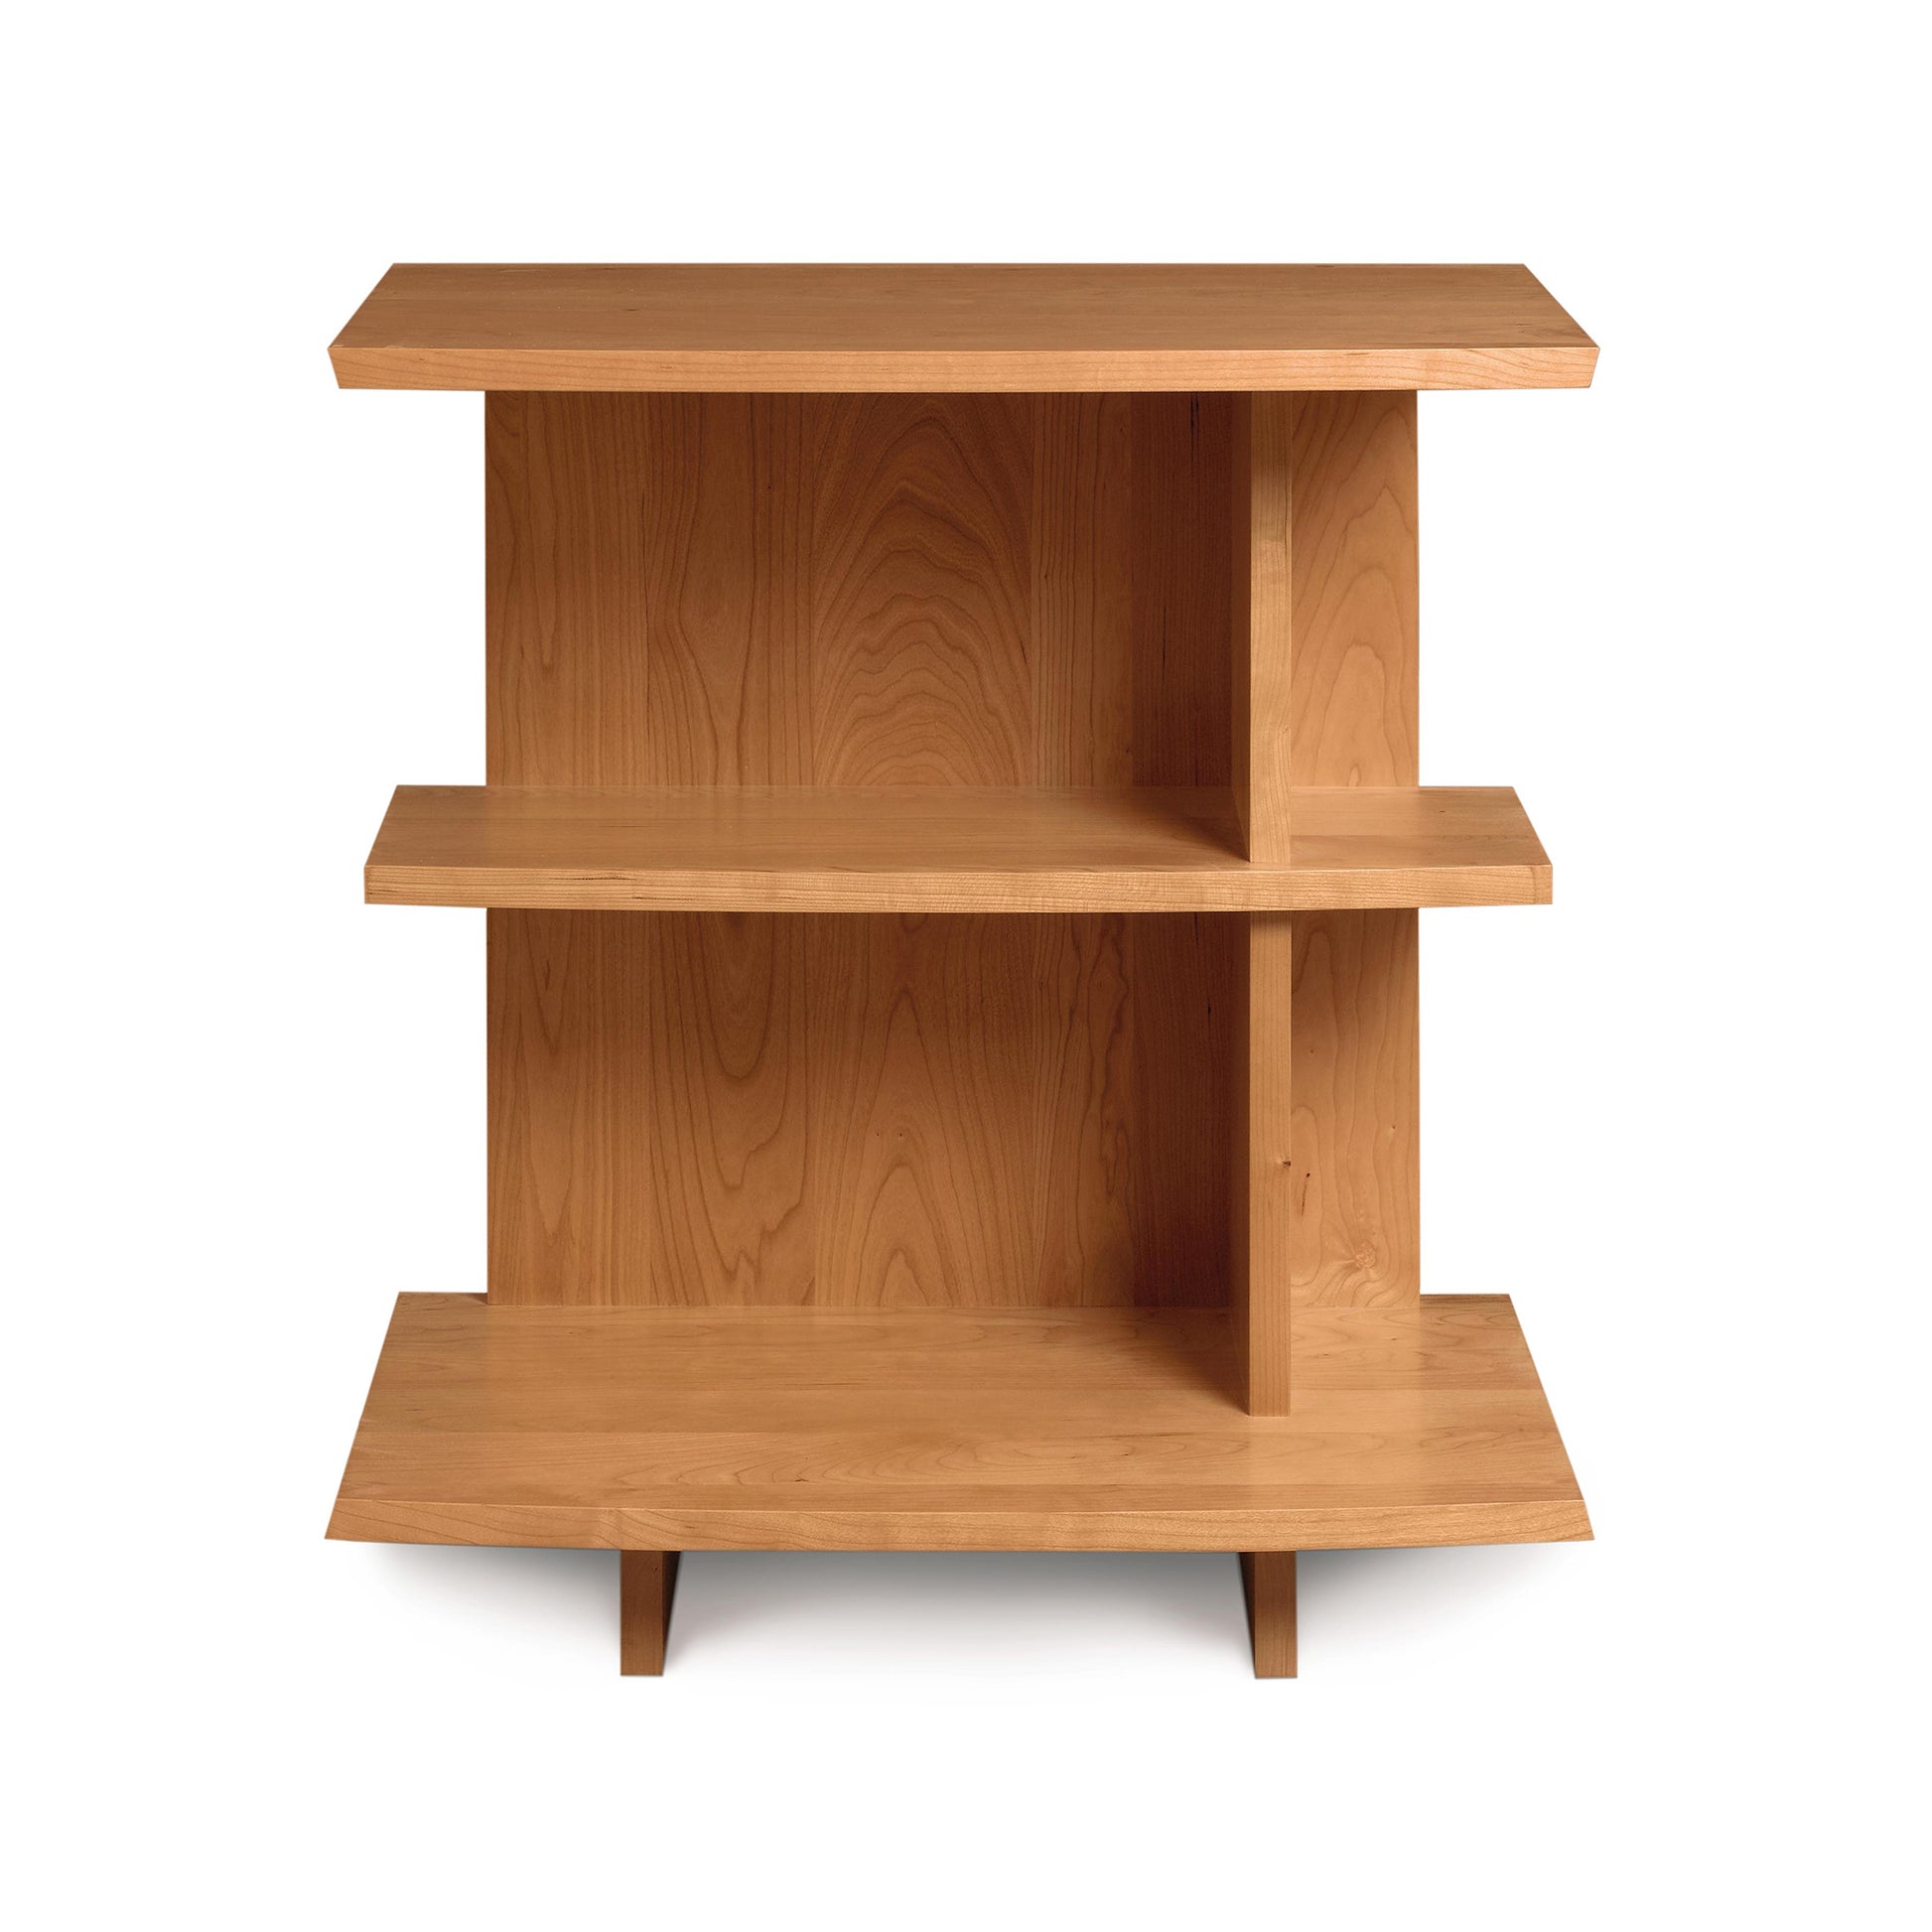 Sentence with replaced product:

Berkeley Open Shelf Nightstand - Left isolated on a white background, crafted from solid wood by Copeland Furniture.